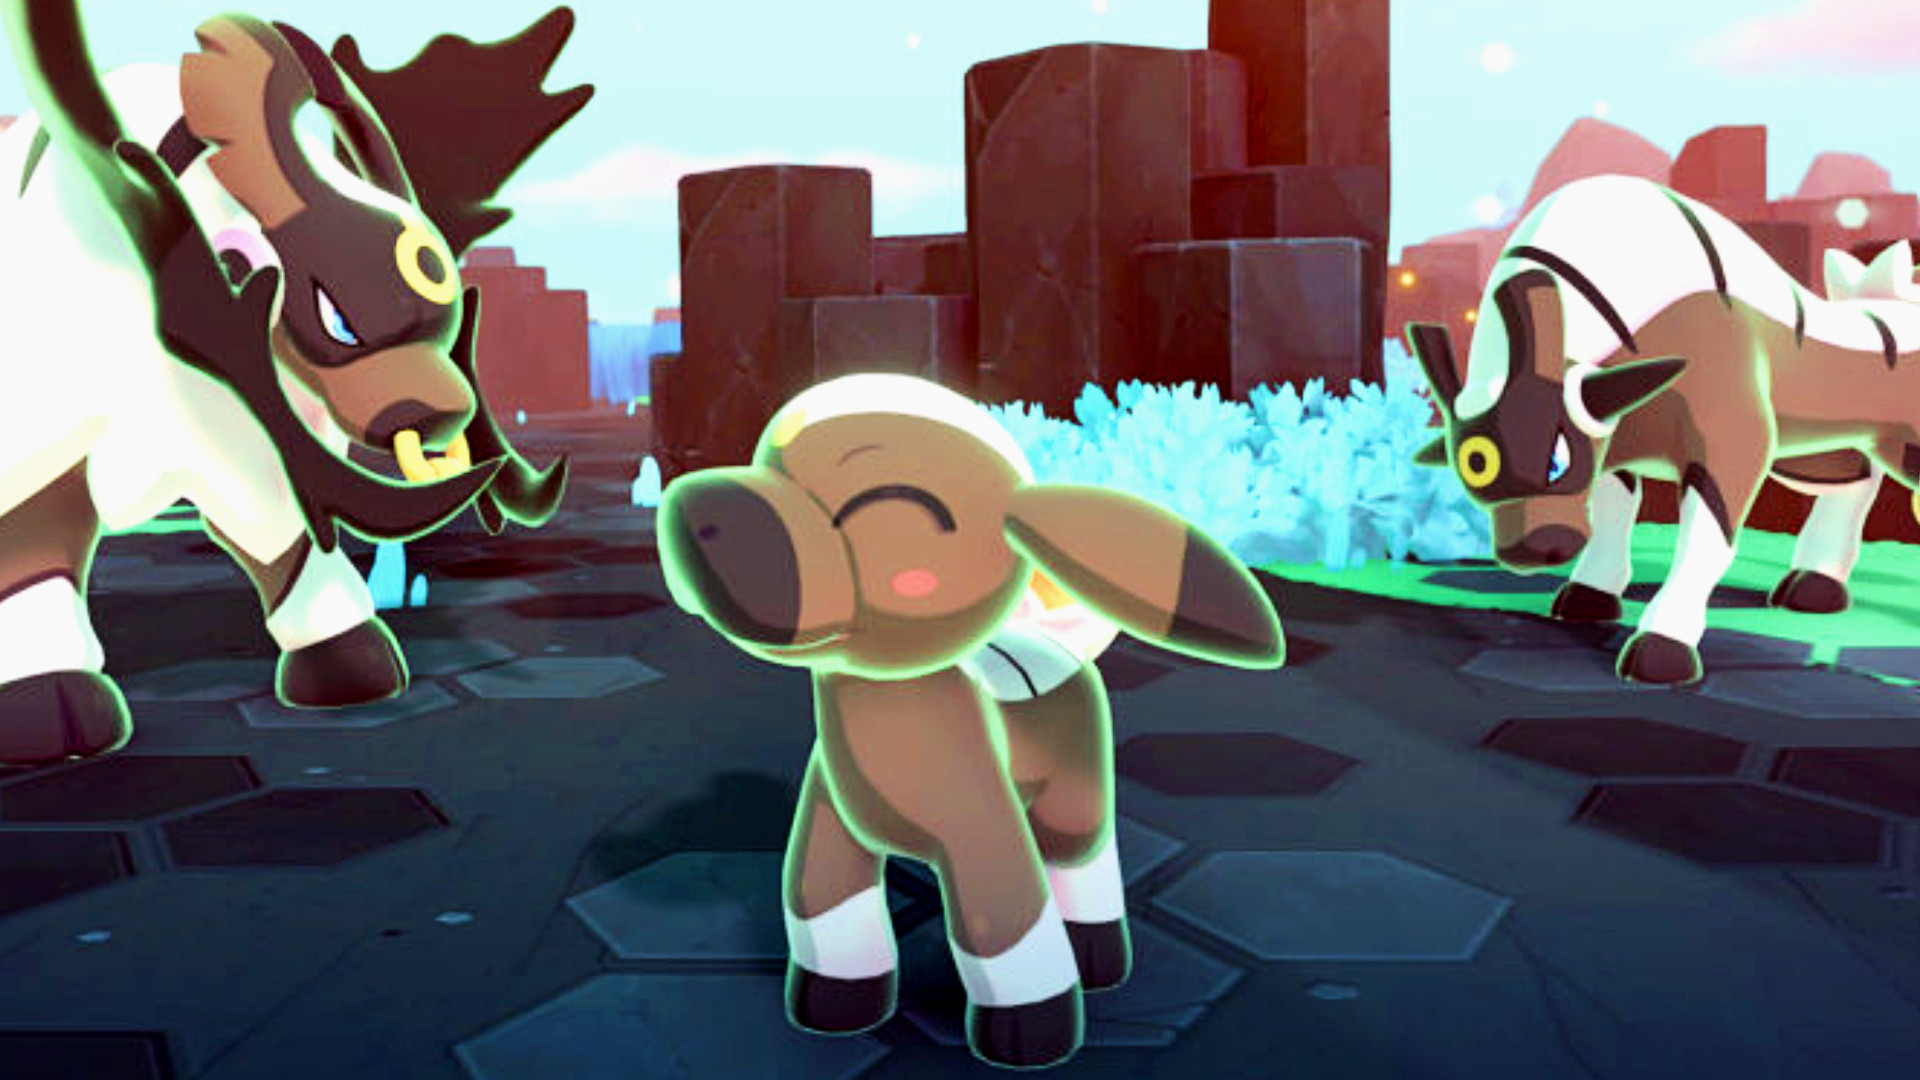 Pokémon like Temtem microtransactions and campaign detailed